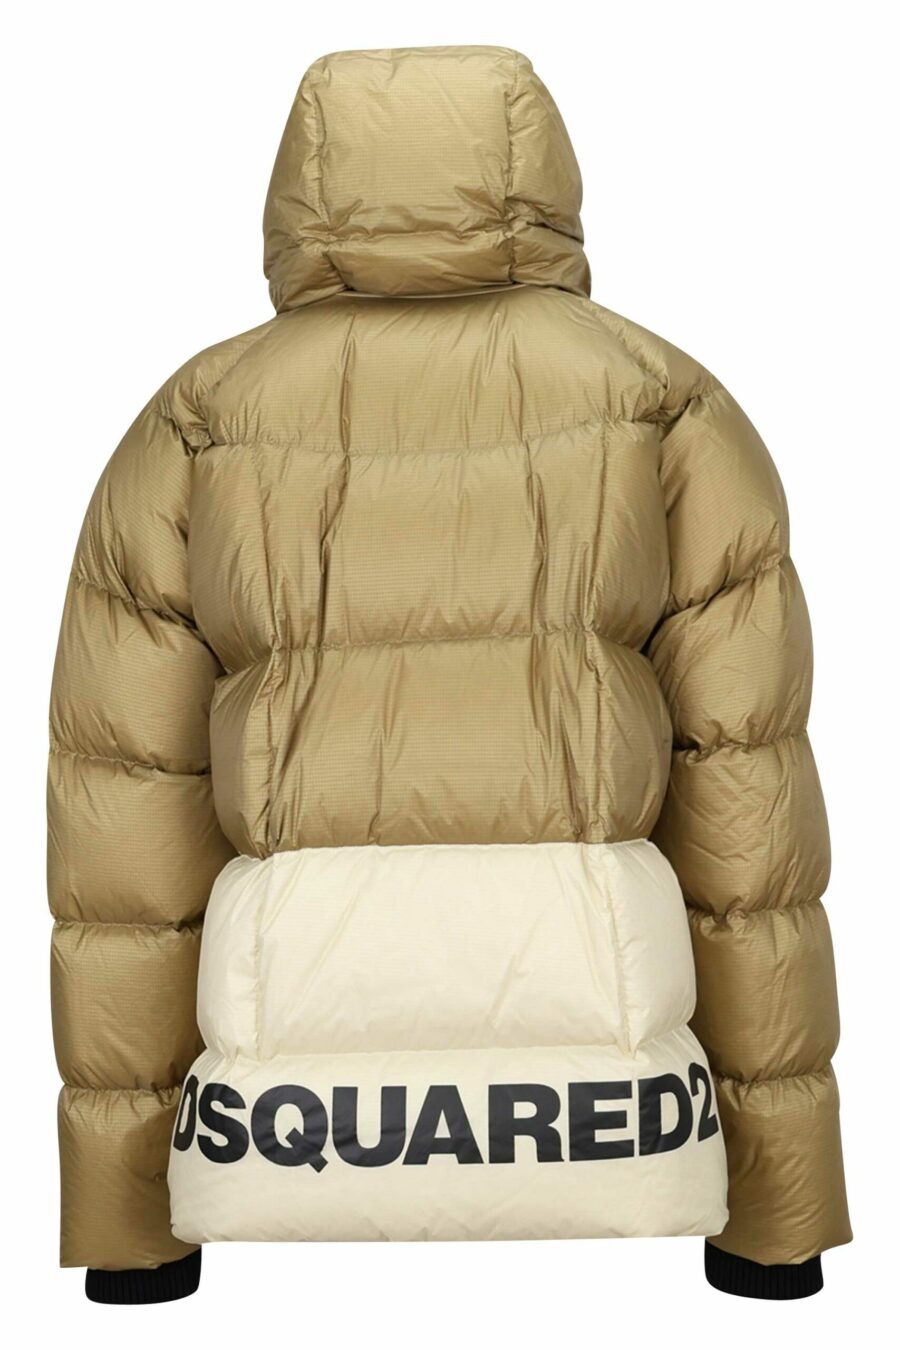 Beige puff kaban puffer jacket with high collar and logo on the back - 8054148052607 1 scaled